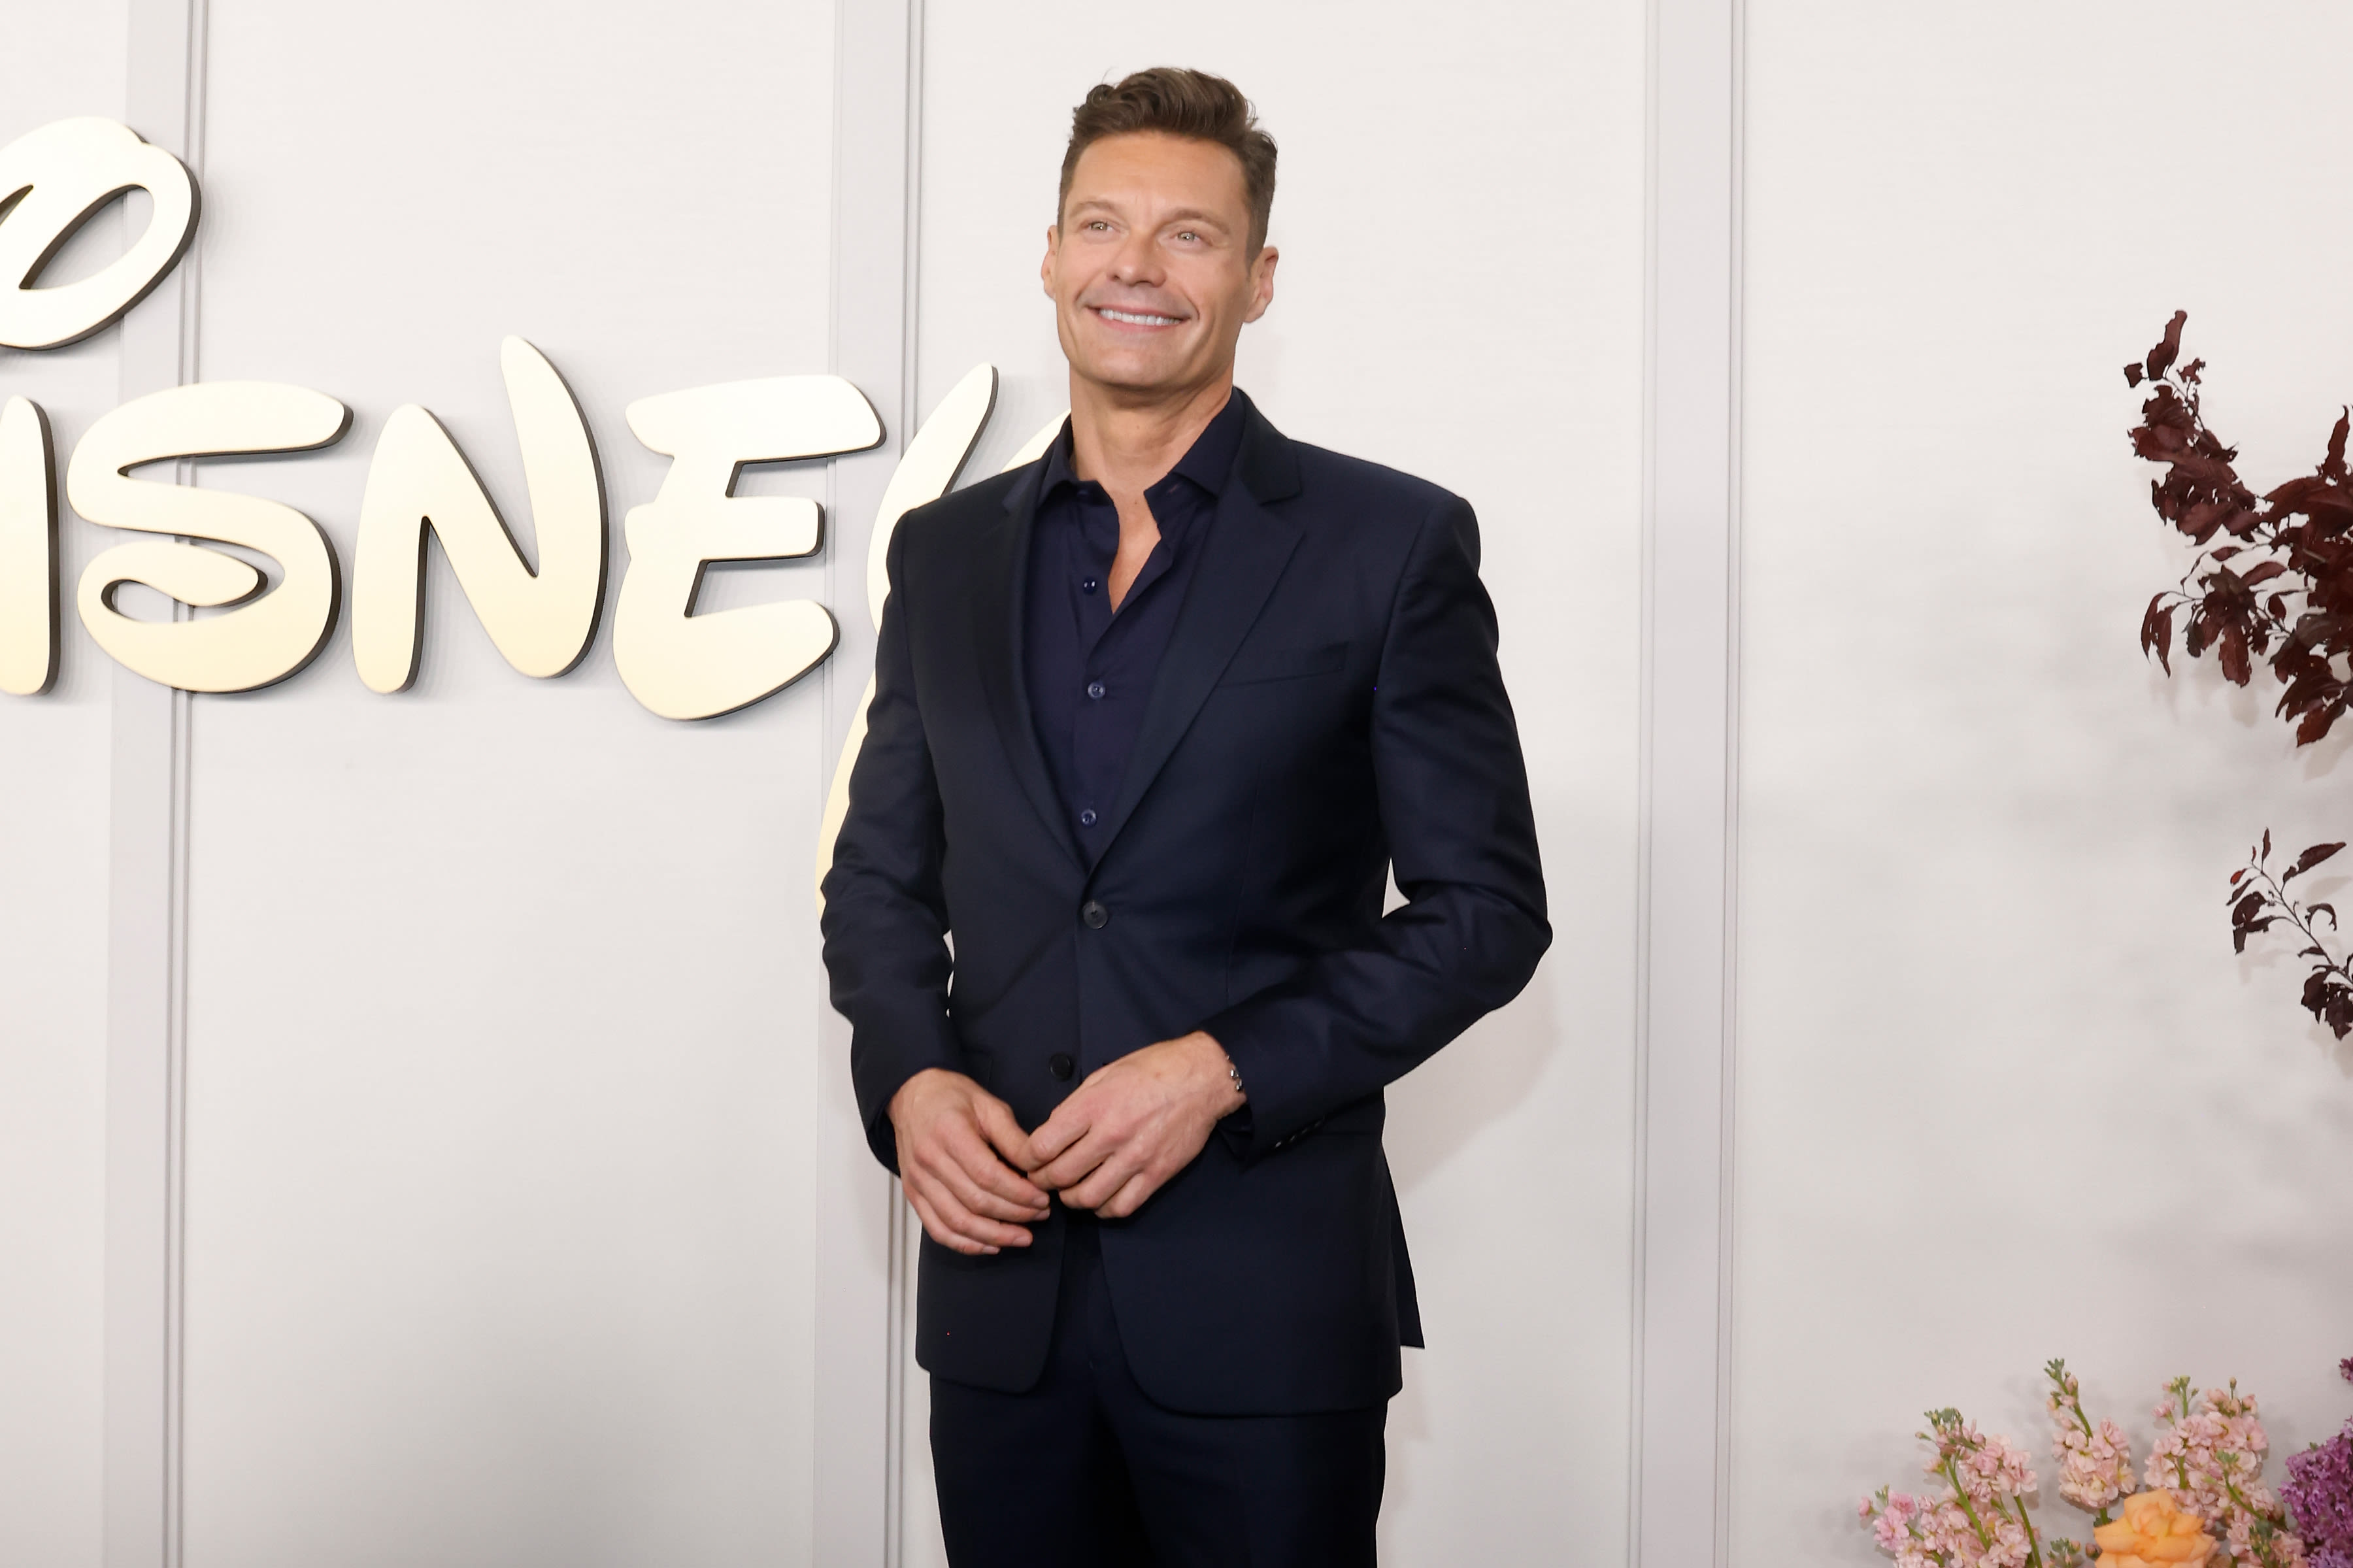 Ryan Seacrest Wants to ‘Take Over the Food World’ With Shows, Cookbooks and More